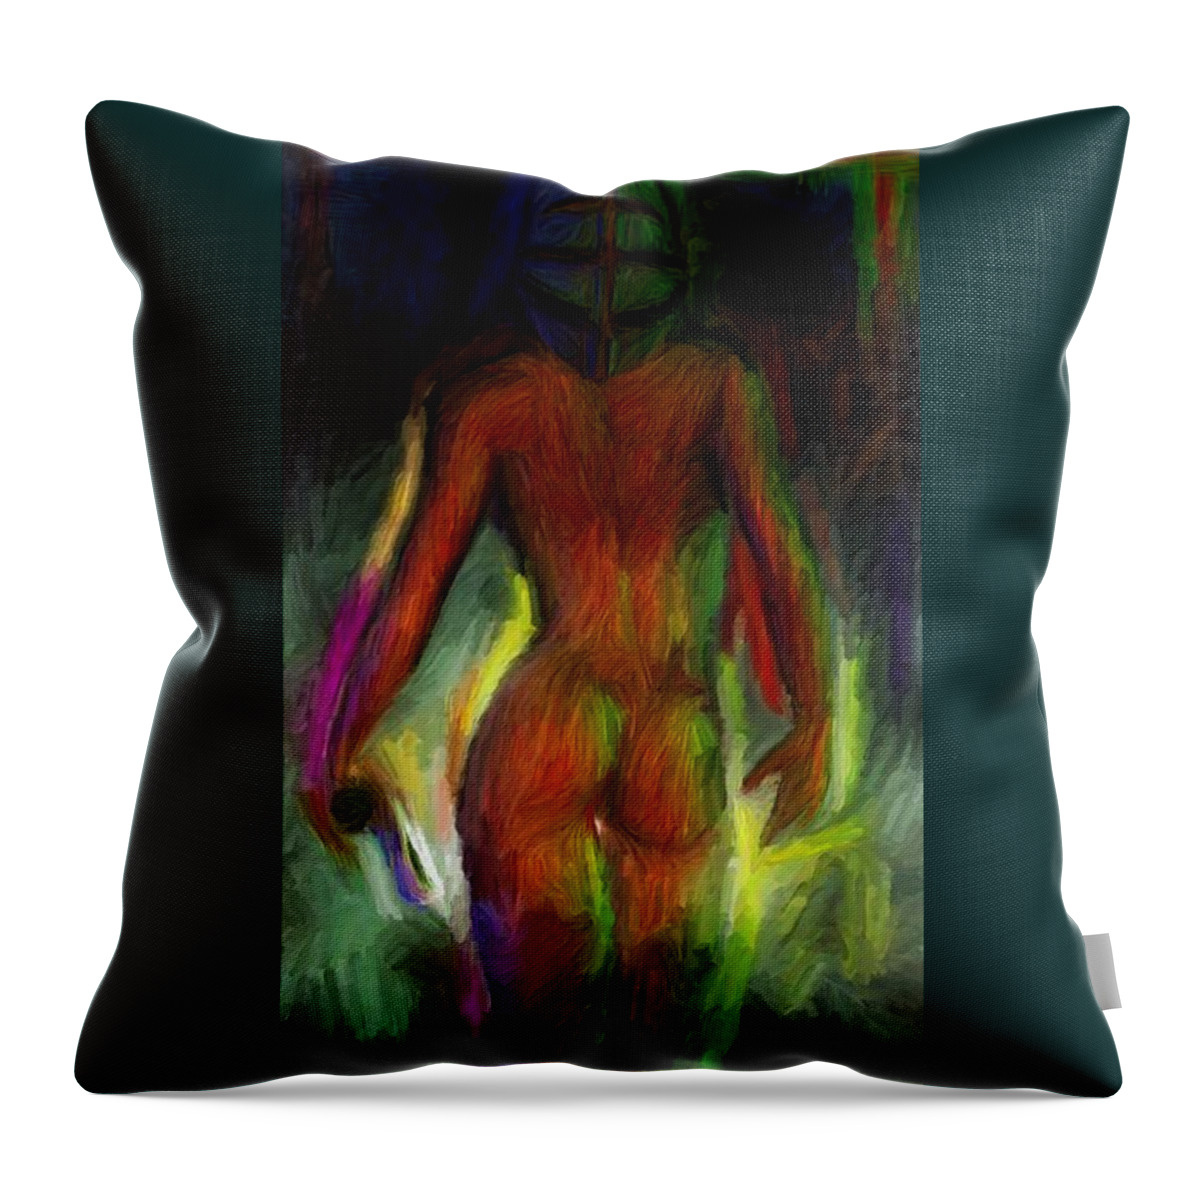 Female Nude Throw Pillow featuring the digital art Catwalk Into the Light by Caito Junqueira